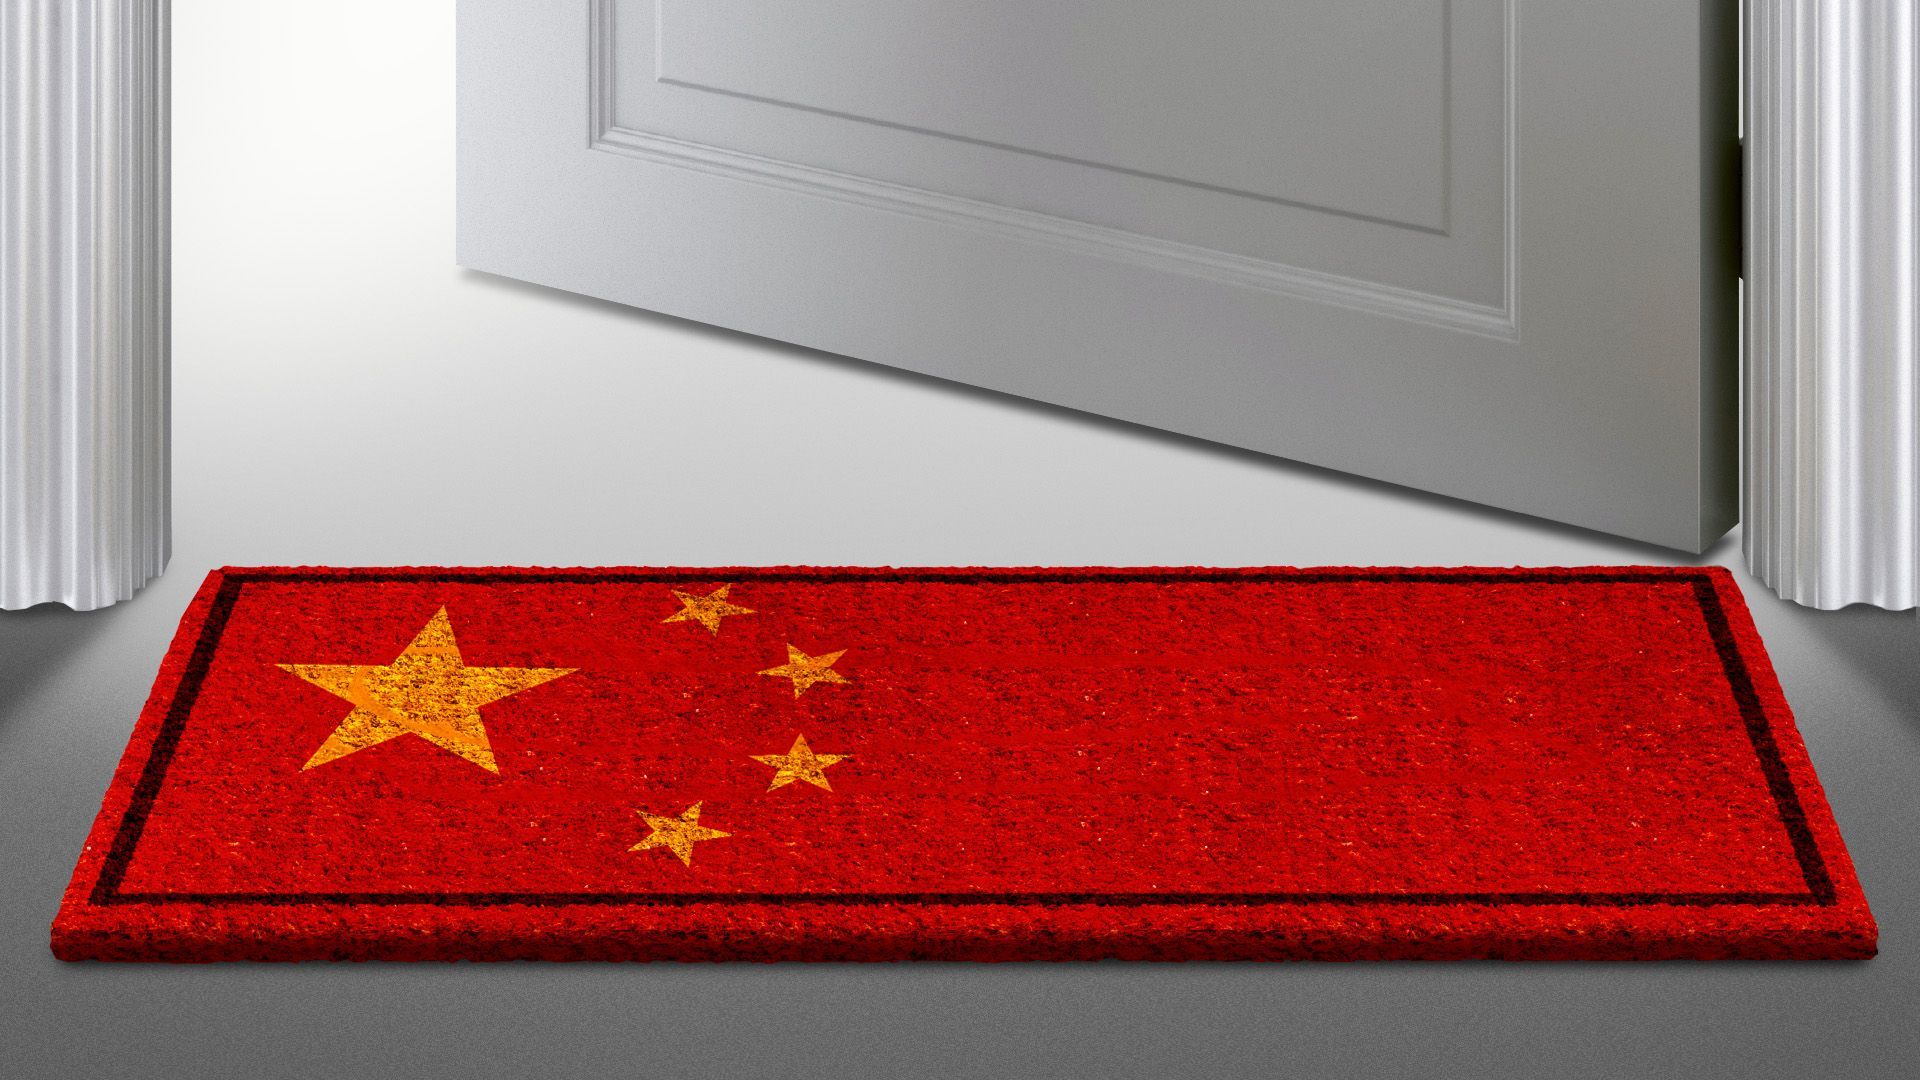 Illustration of a chinese flag doormat in front of an open door